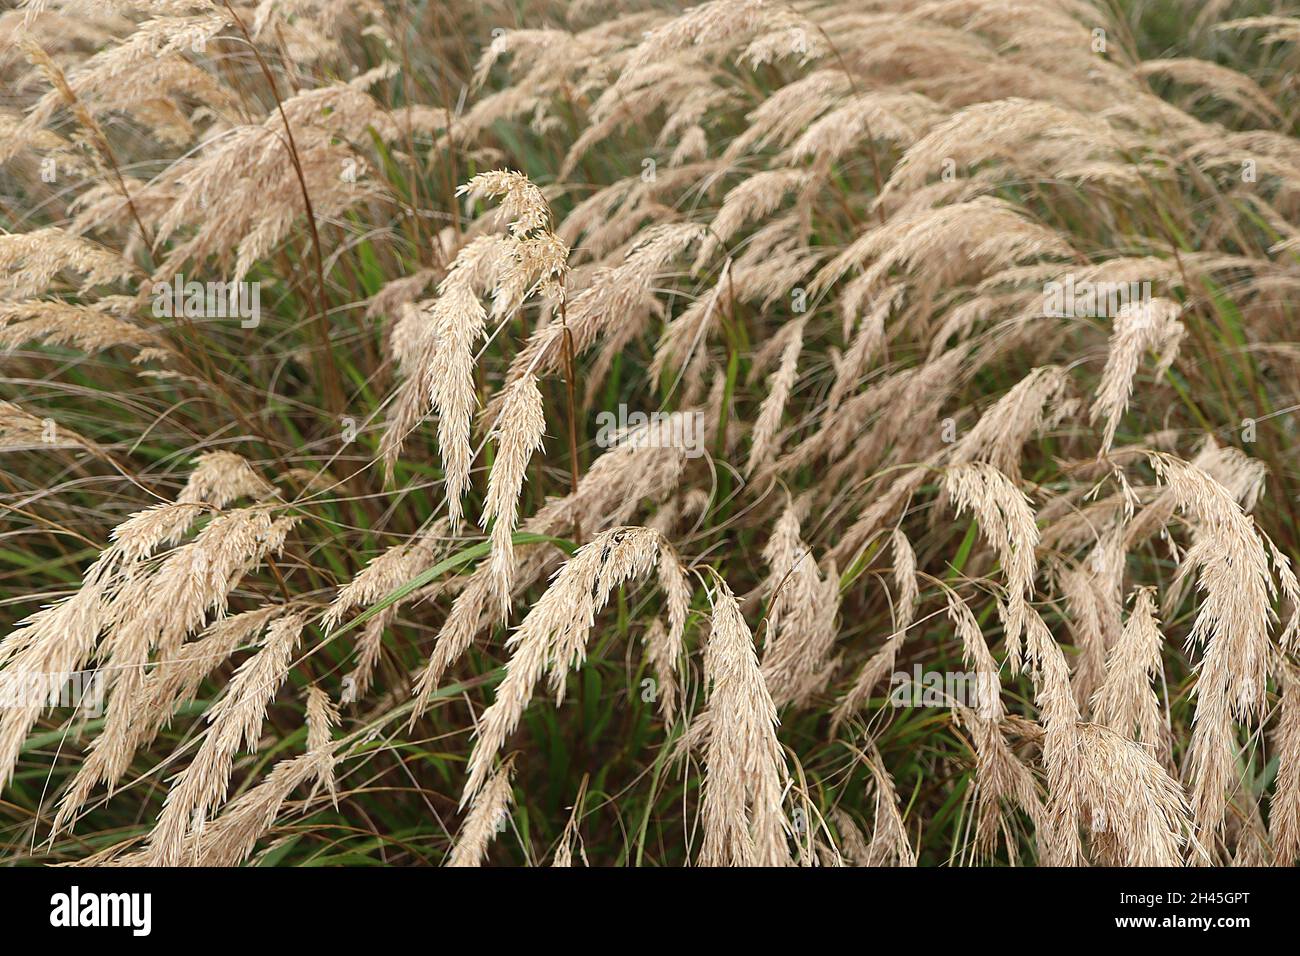 Stipa calamagrostis rough feather grass – long feathery arching plumes of buff panicles and mid green stems,  October, England, UK Stock Photo